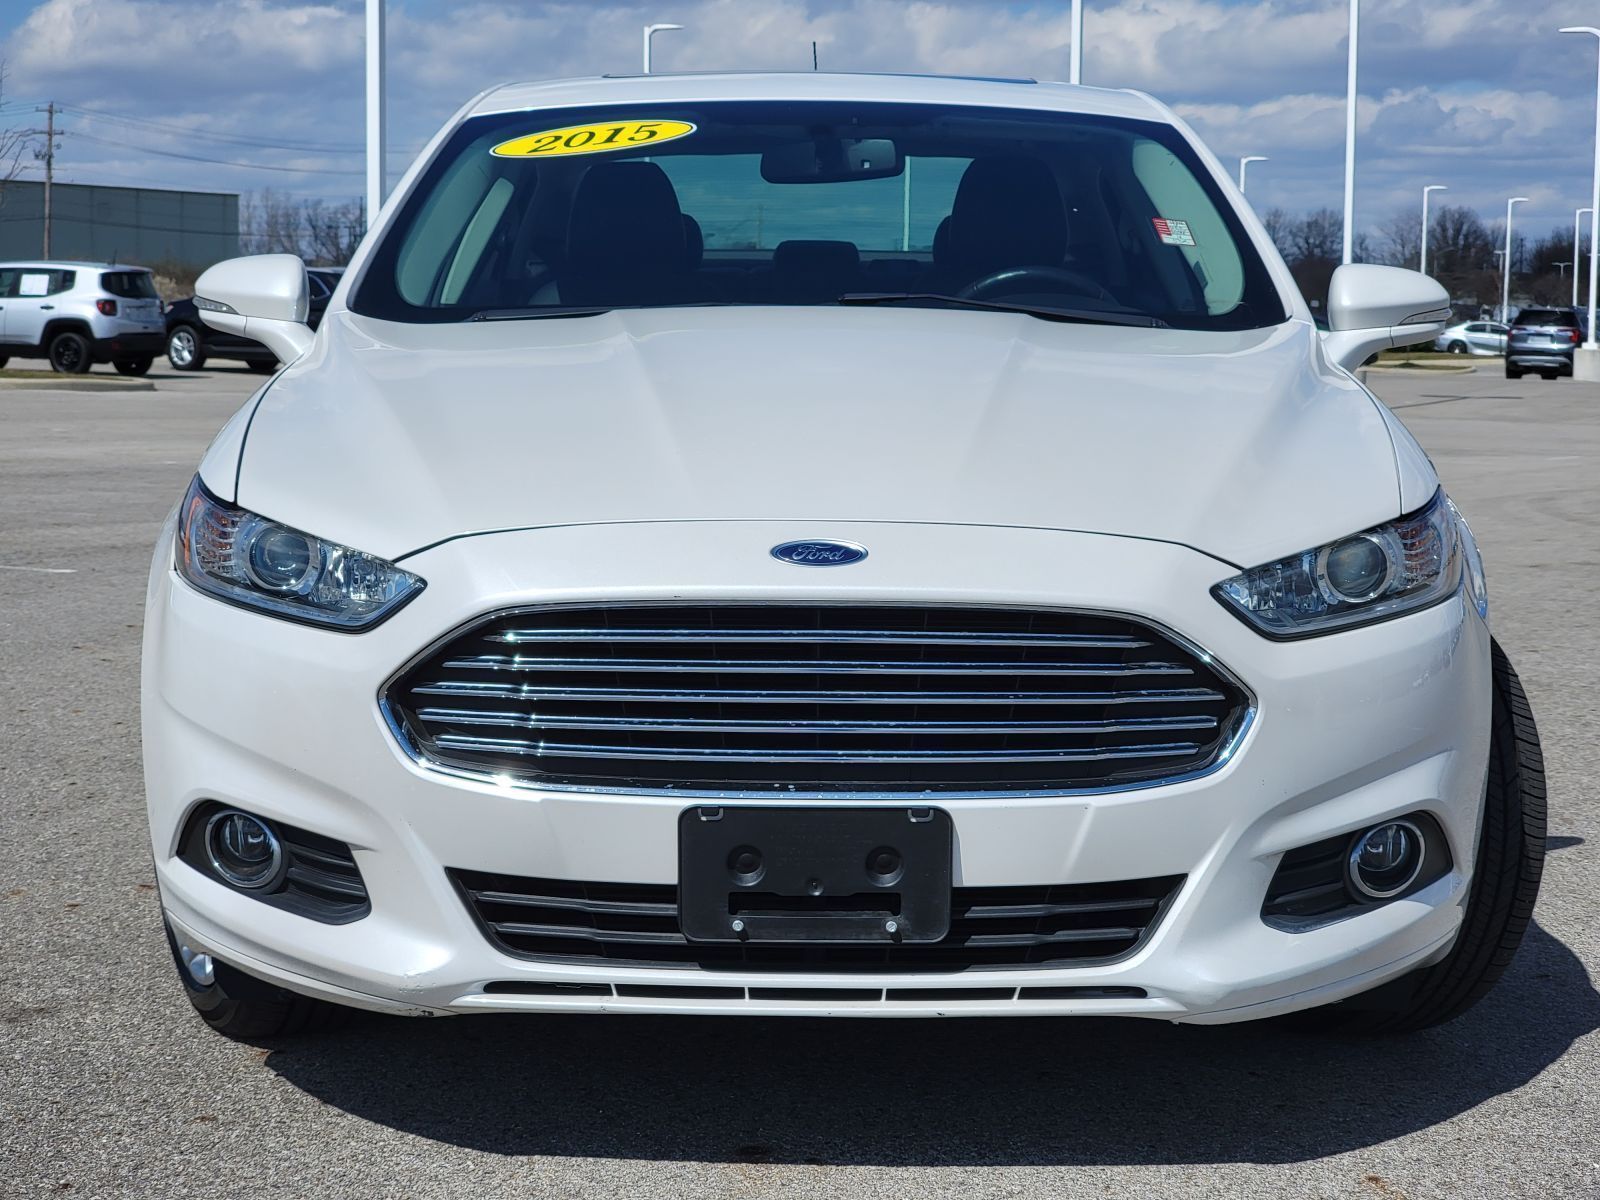 Used, 2015 Ford Fusion SE, White, 13946-11